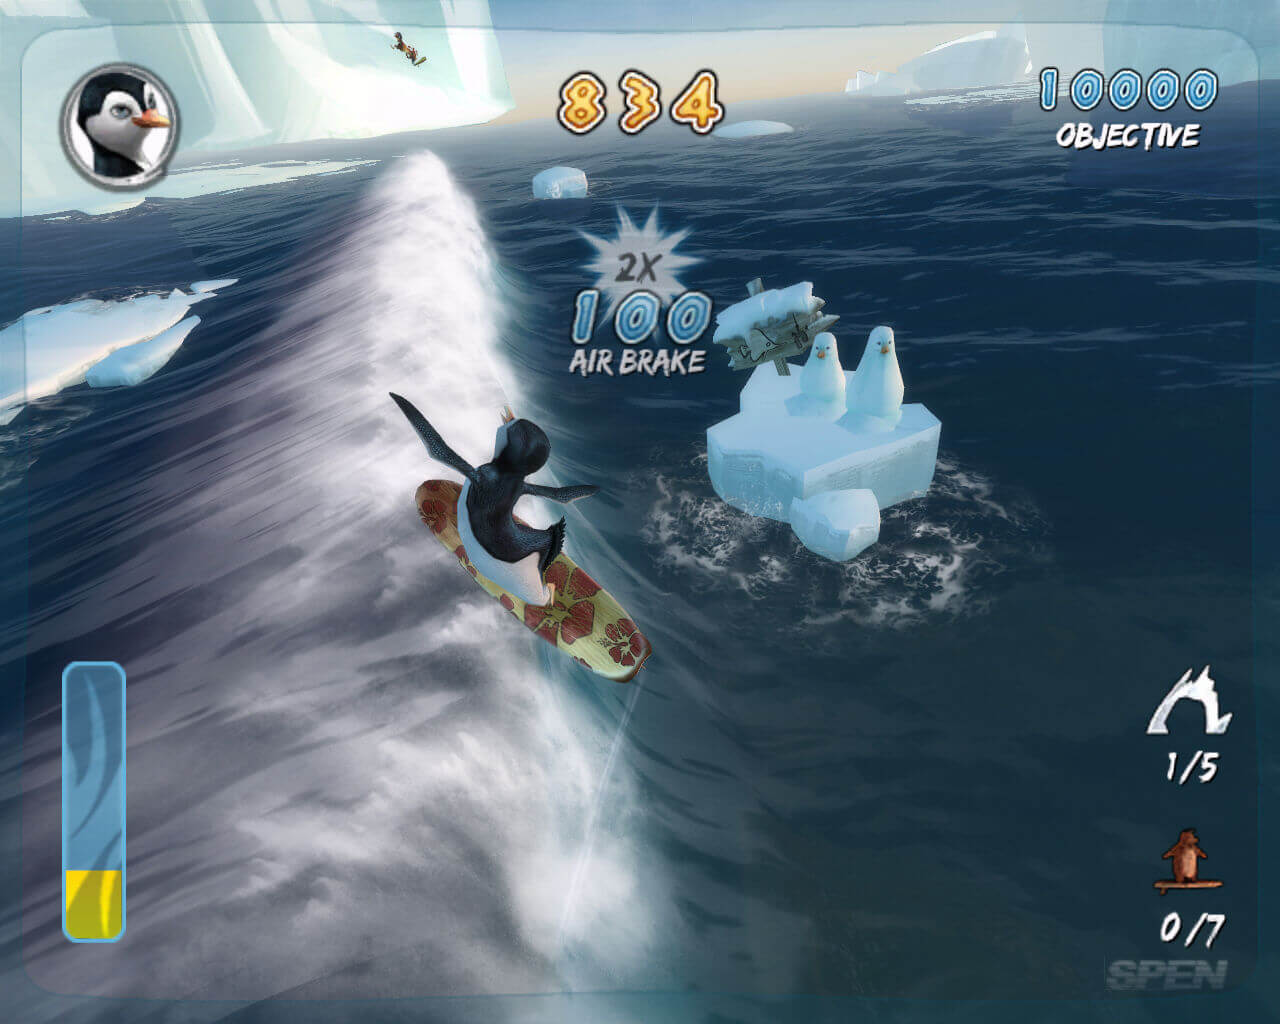  Surf's Up - Xbox 360 : Video Games